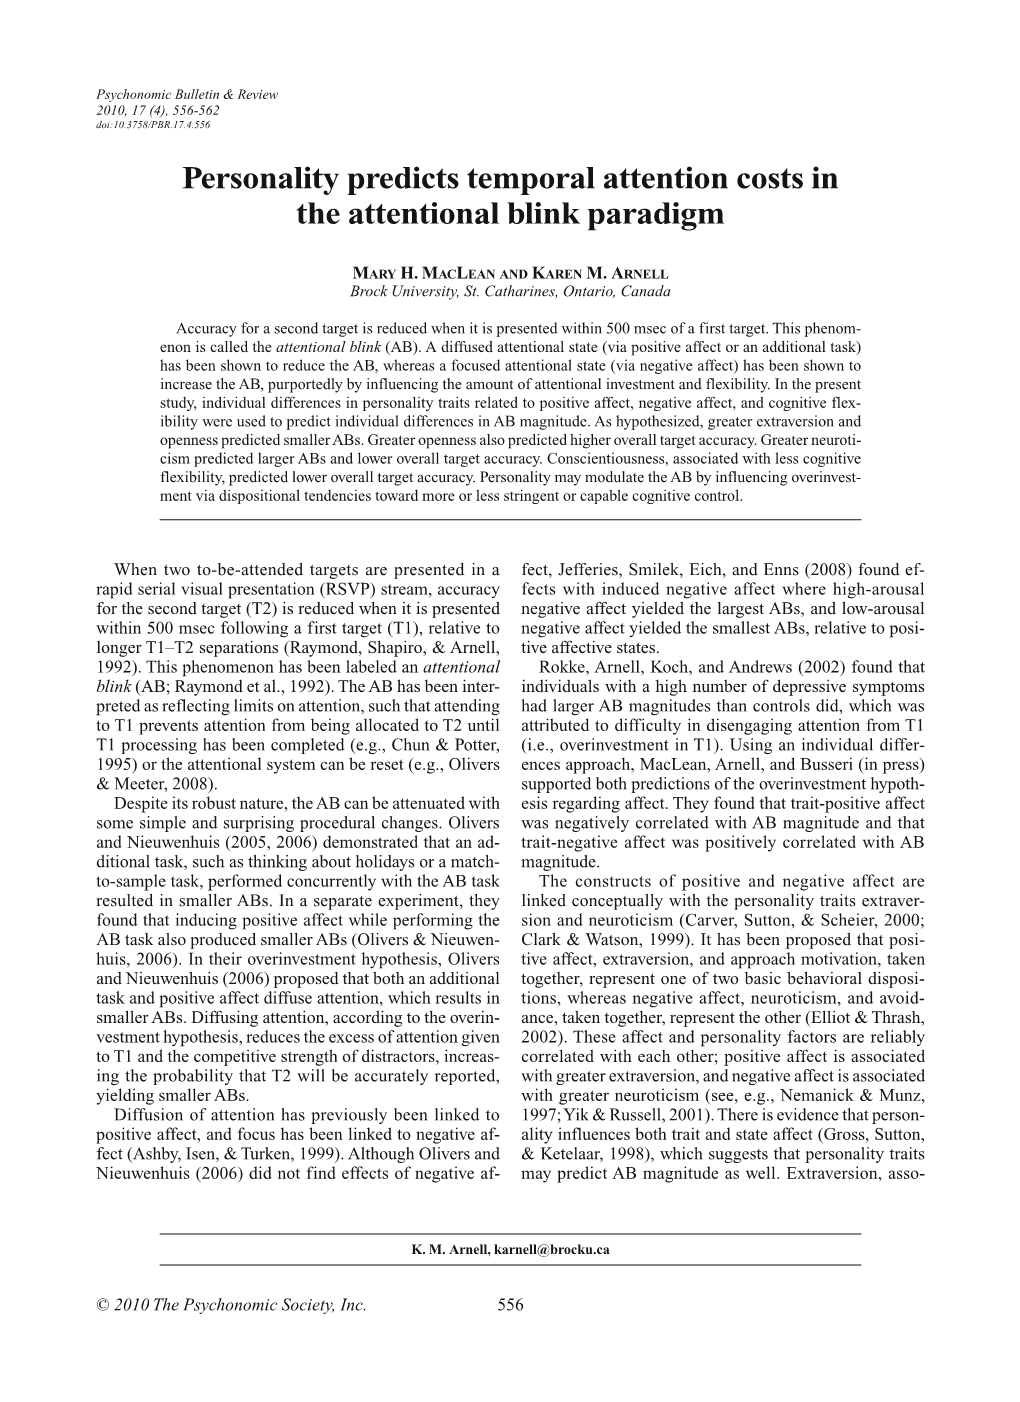 Personality Predicts Temporal Attention Costs in the Attentional Blink Paradigm